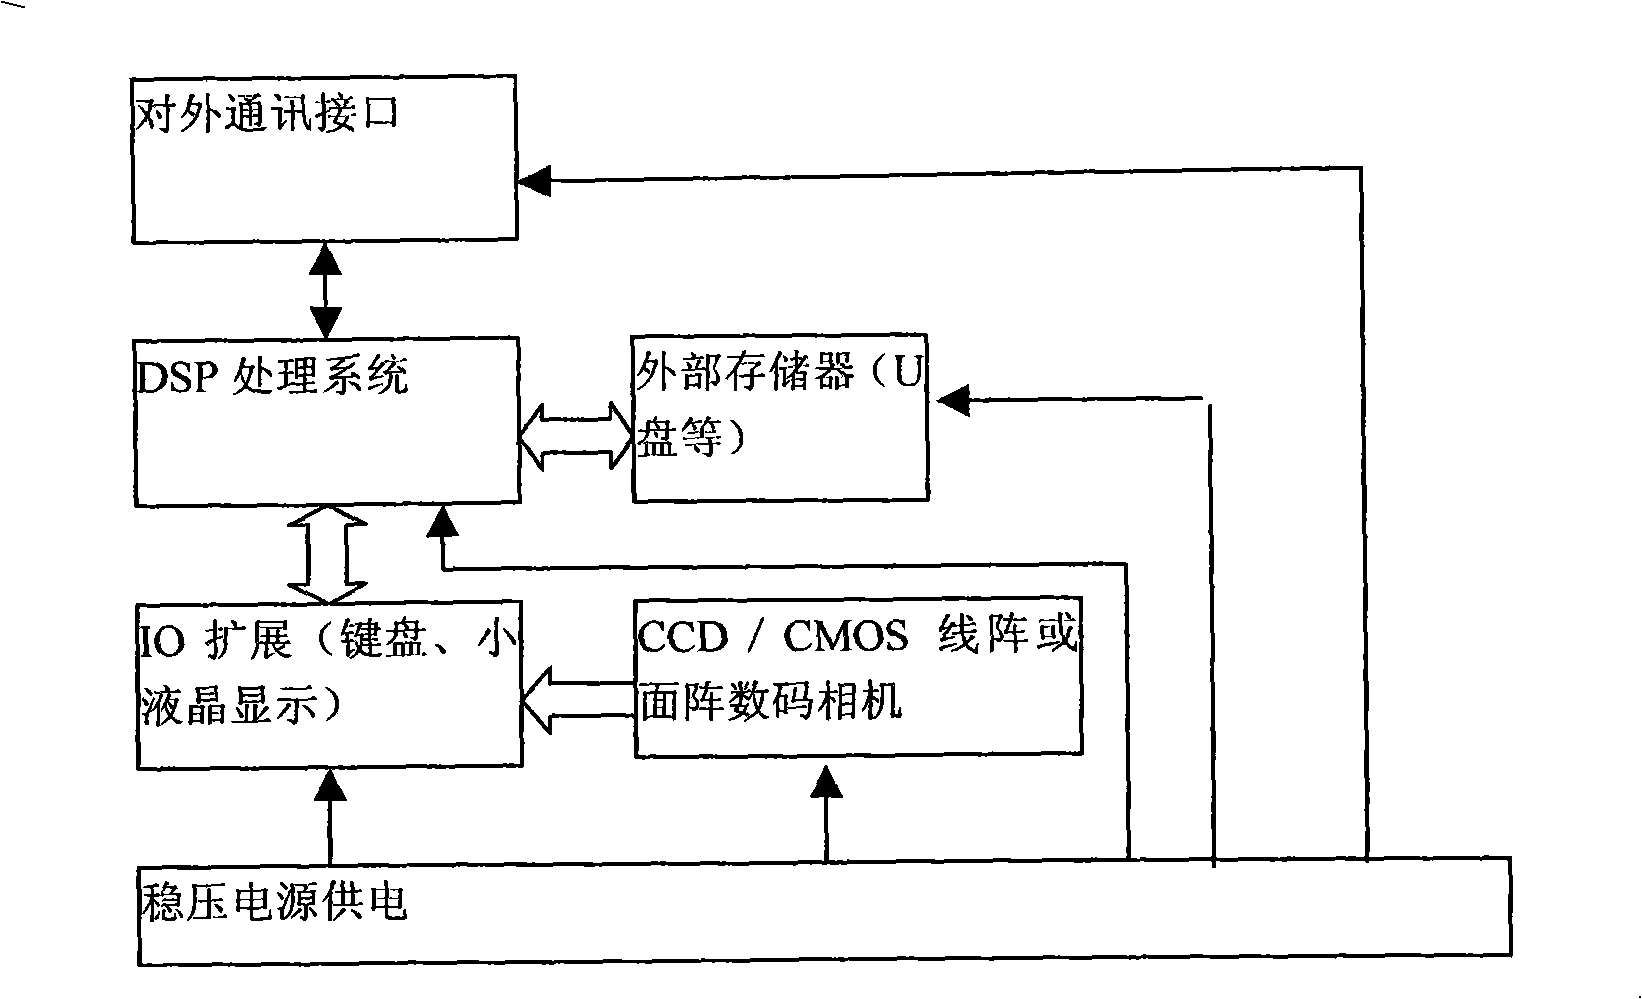 Round knitting machine on-line quality monitoring method based on computer pattern recognition principle